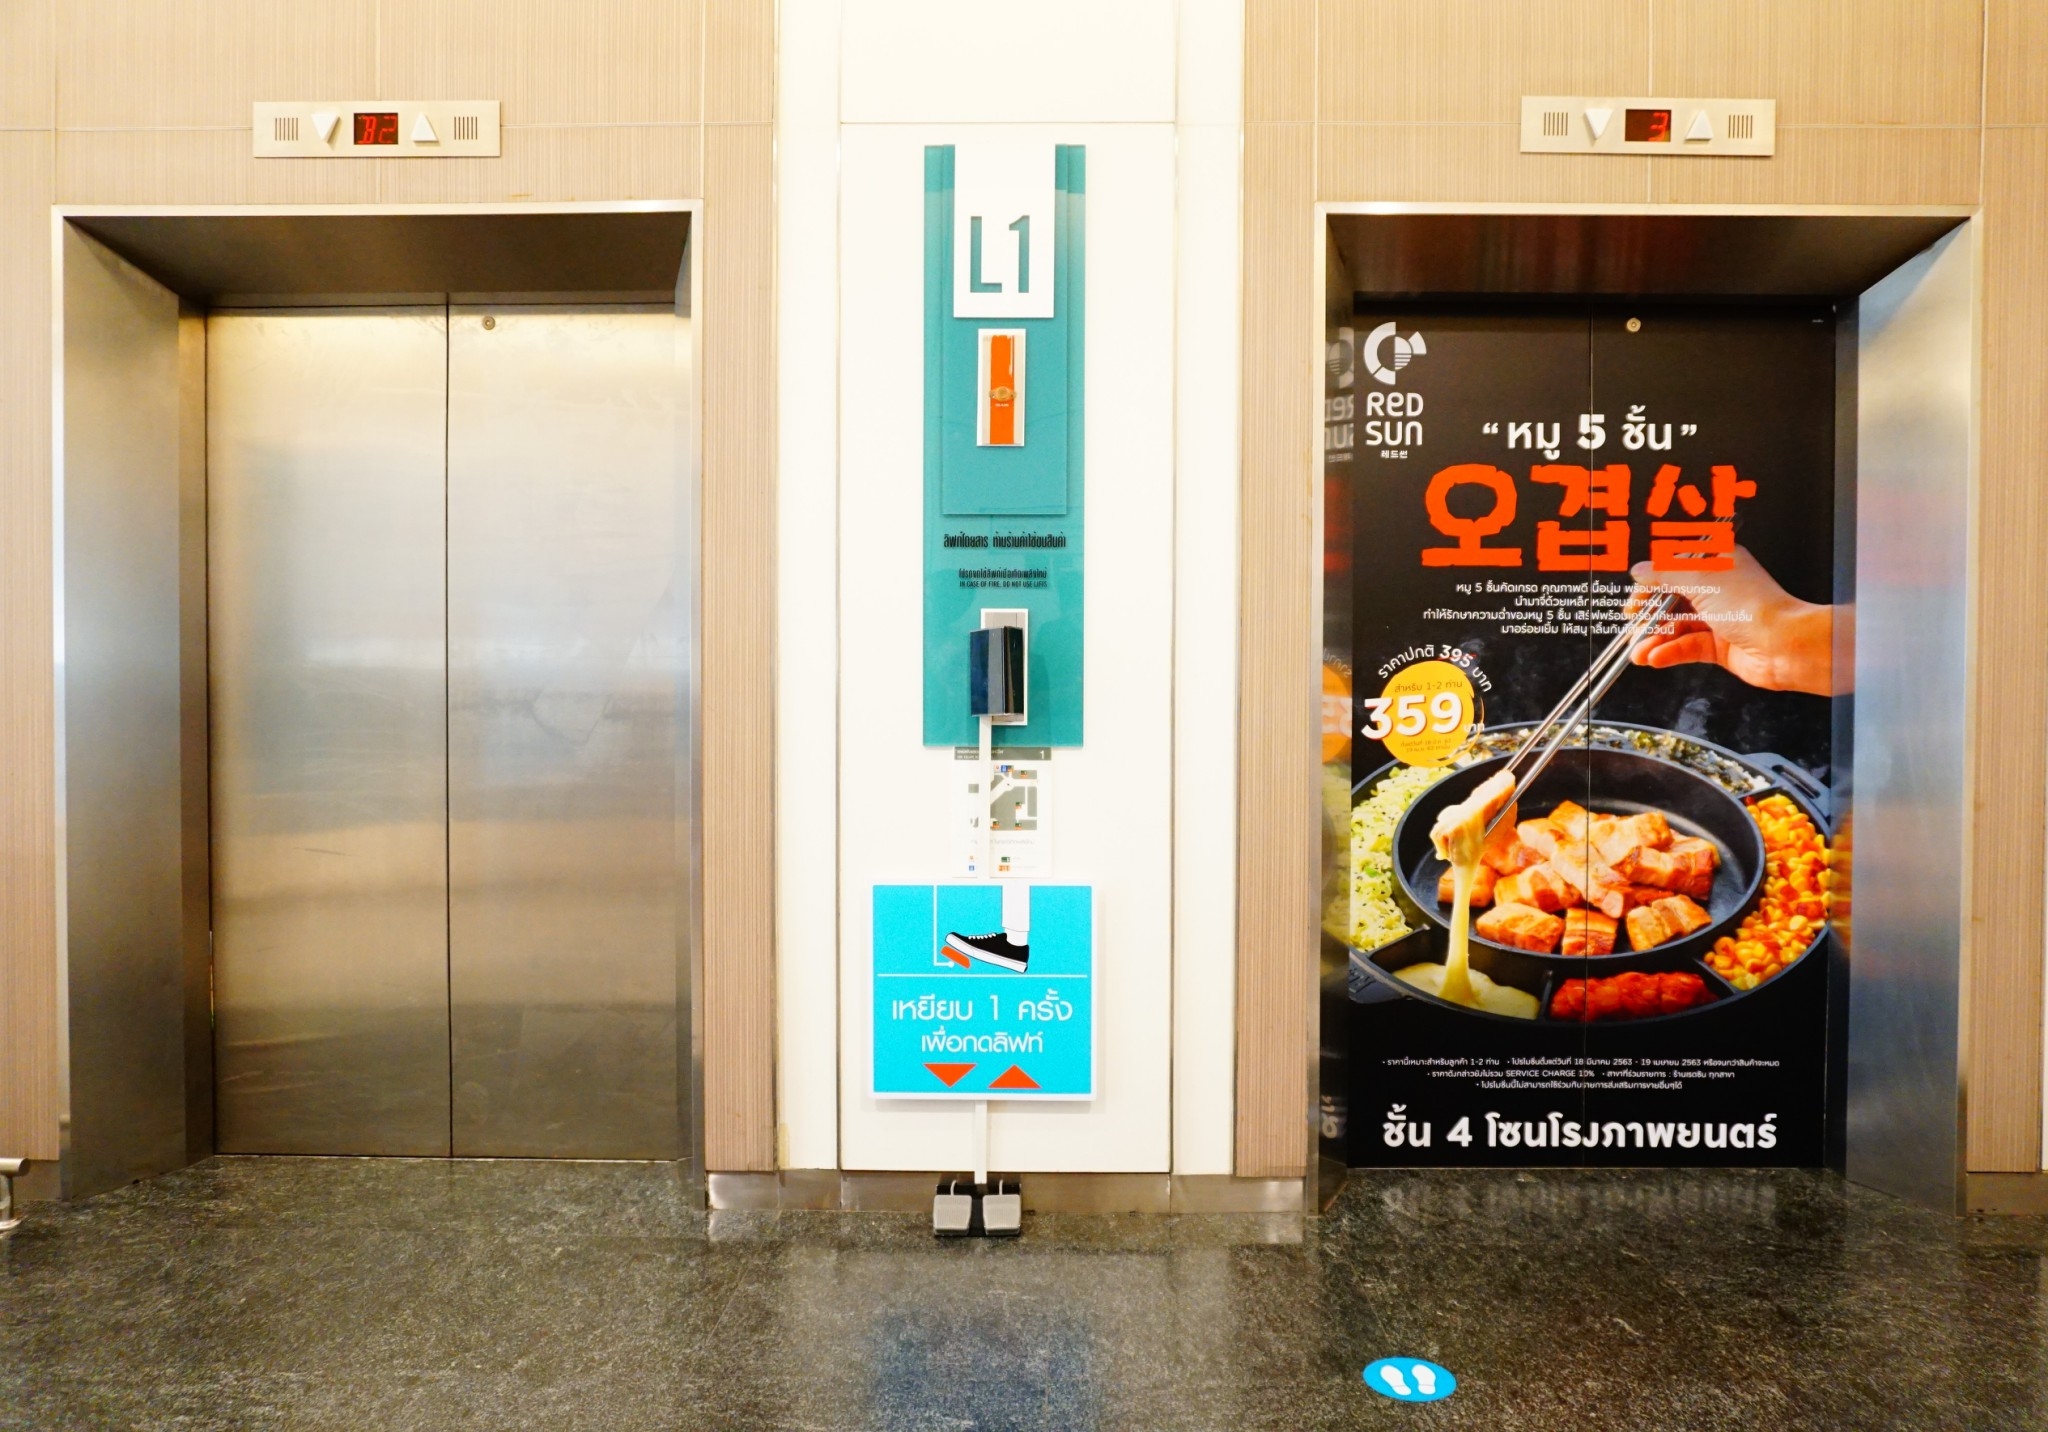 Lift Buttons are Replaced with Foot Pedals in the Mall to Reduce Spread of Coronavirus